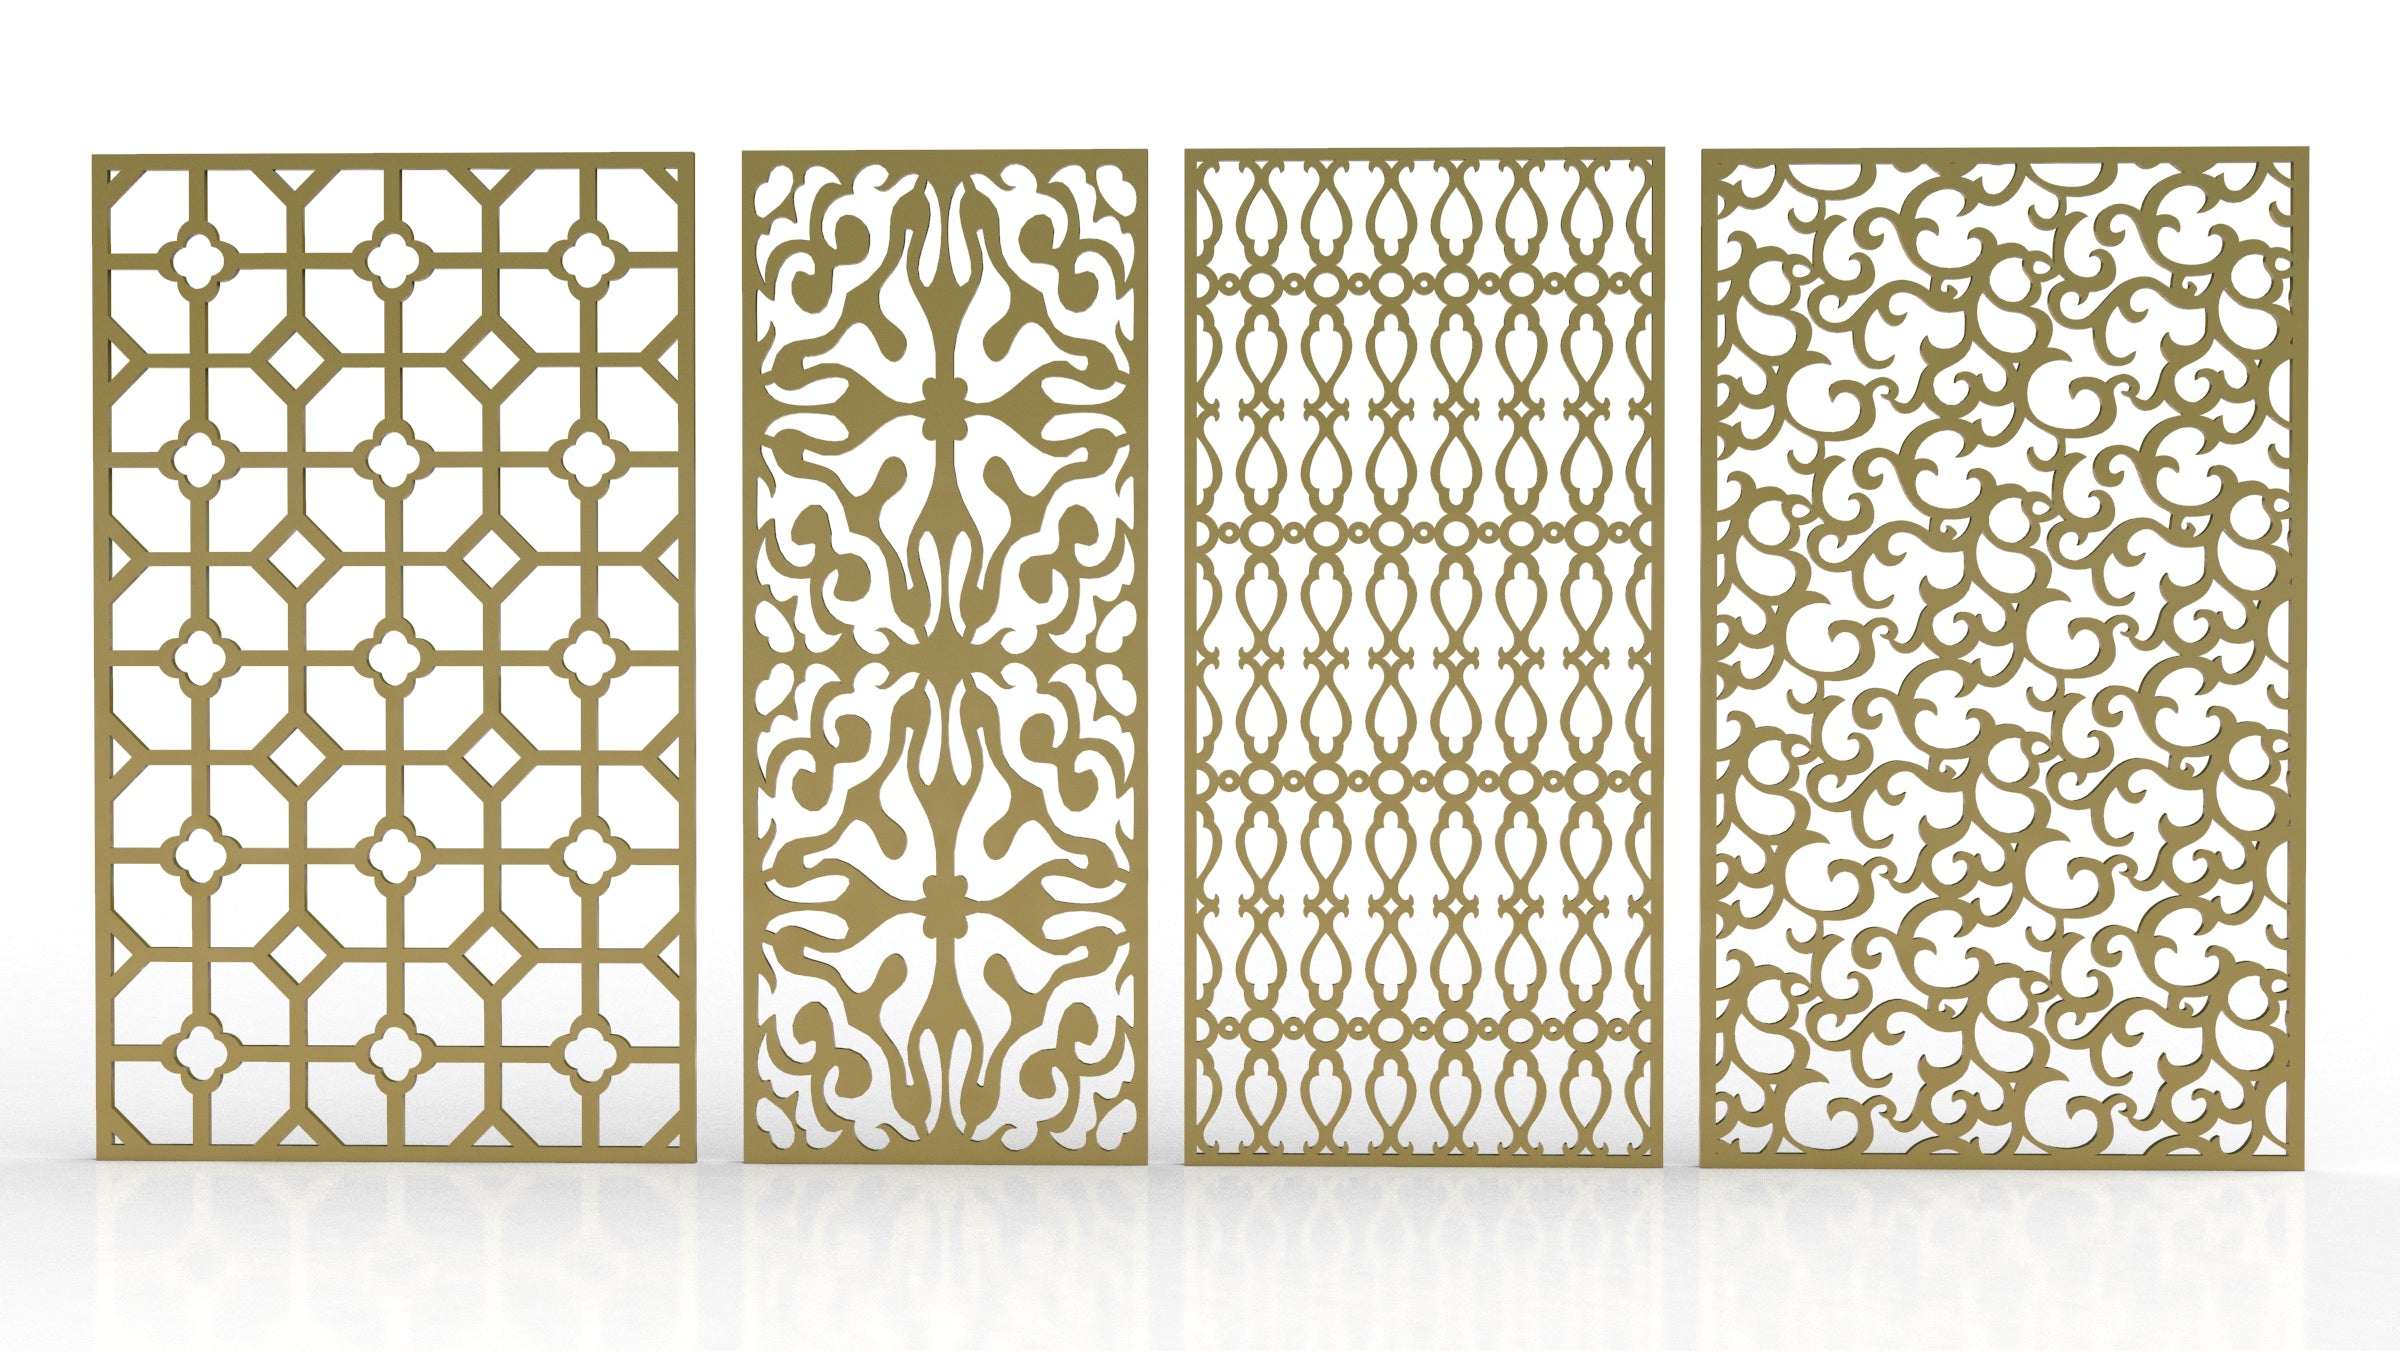 Abstract Pattern Panel Templates CNC Laser Cutting File | SVG, DXF, AI |#C027|